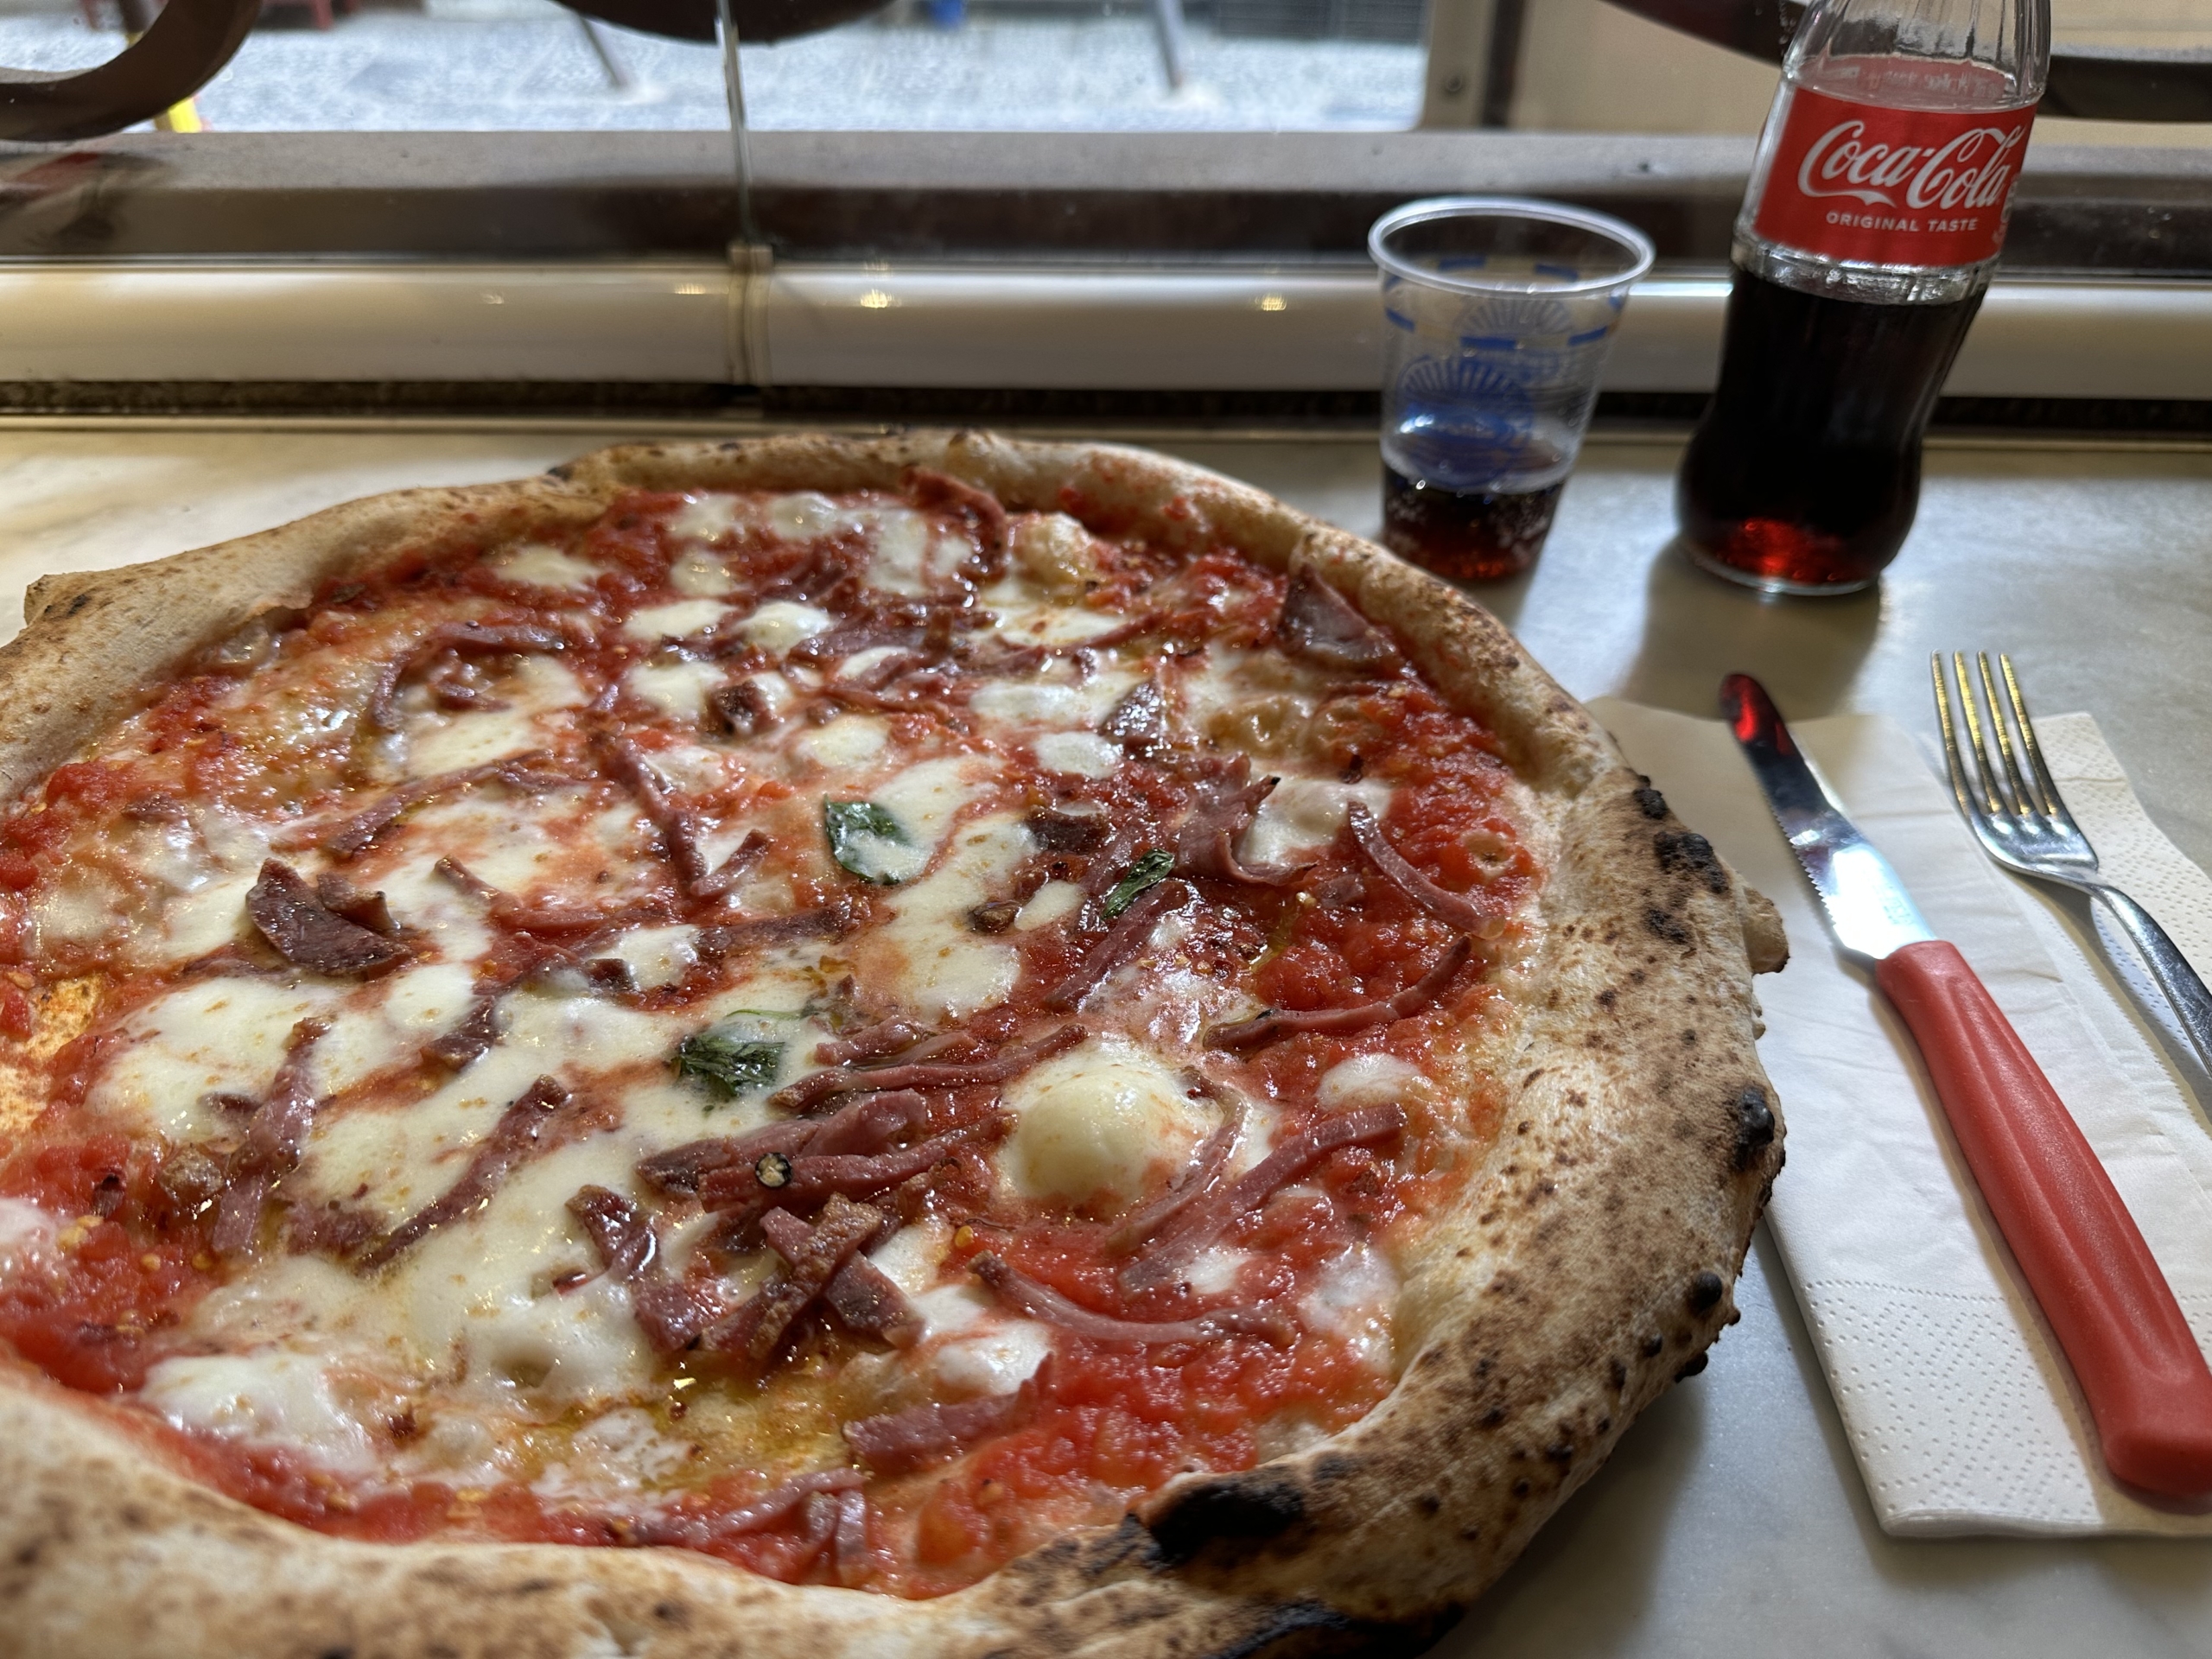 Pizza in Naples is a must, I went to Sorbillo.